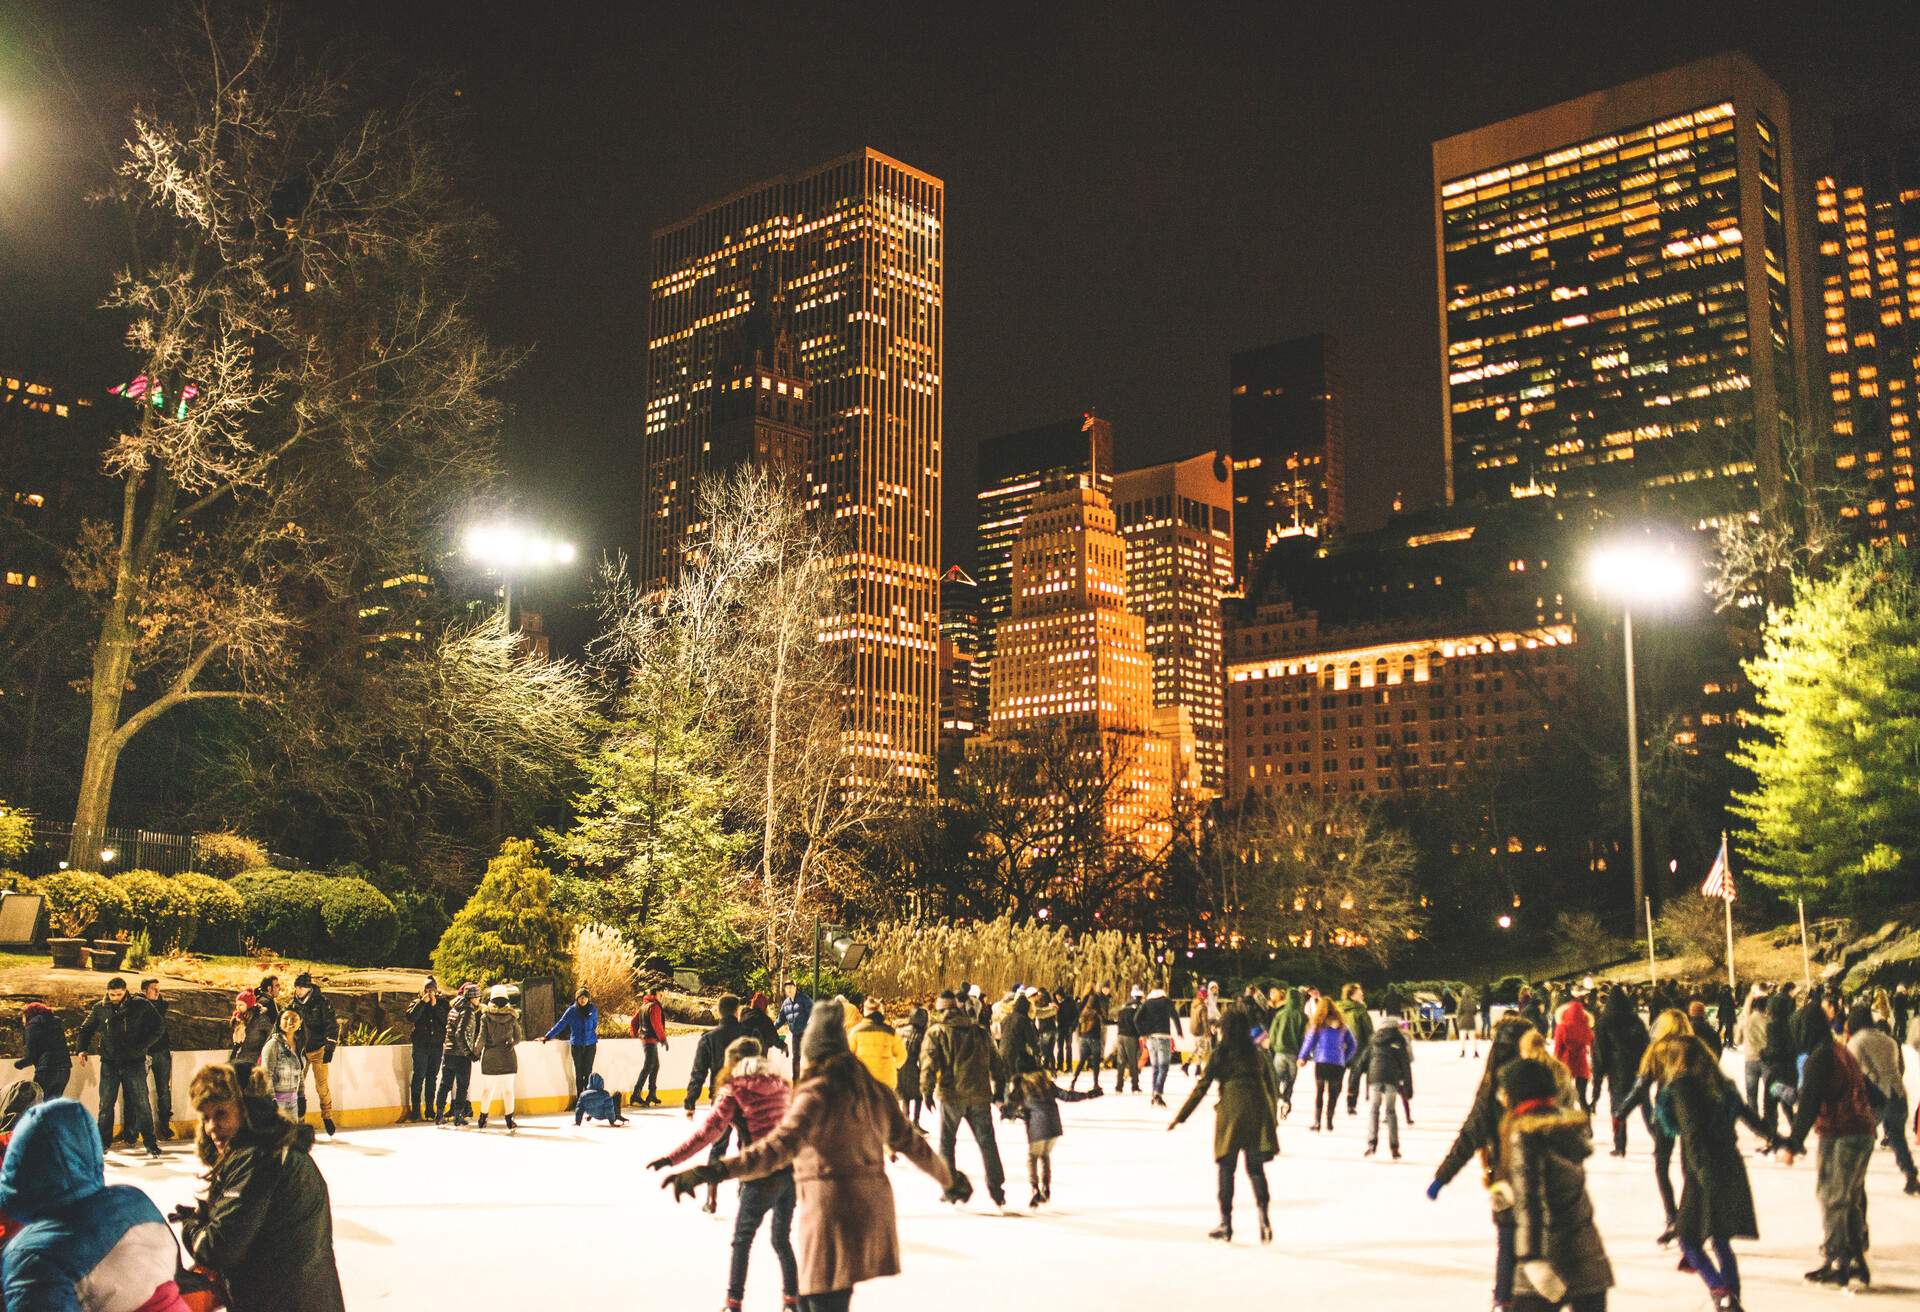 DEST_USA_NYC_New-York City_Centra-Park-ICE-SKATING_GettyImages-496446275